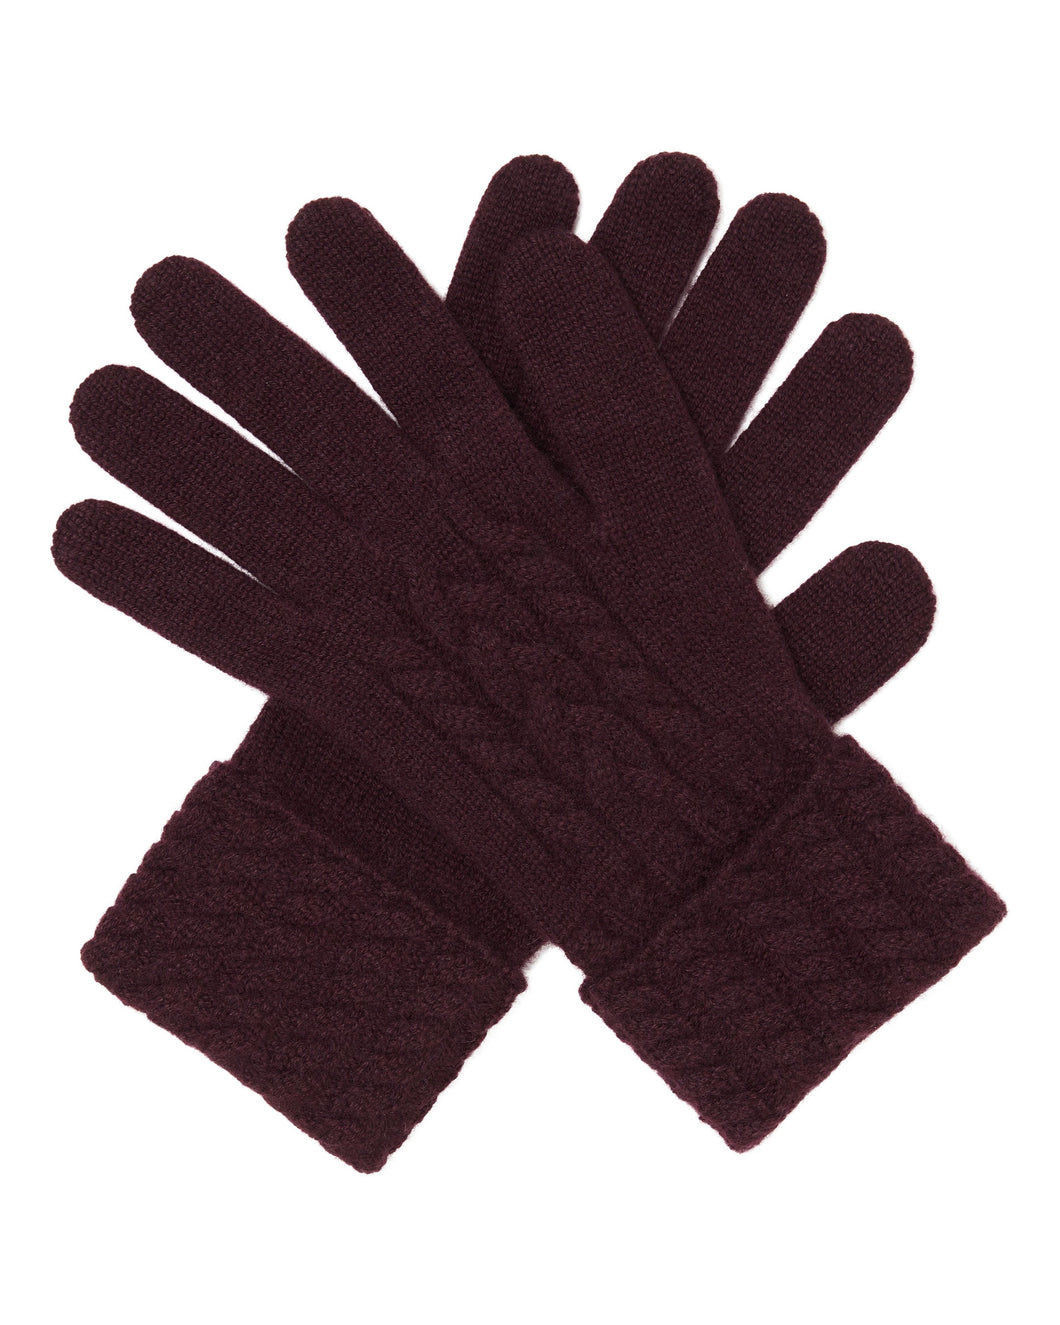 N.Peal Women's Cable Cashmere Gloves Plum Purple